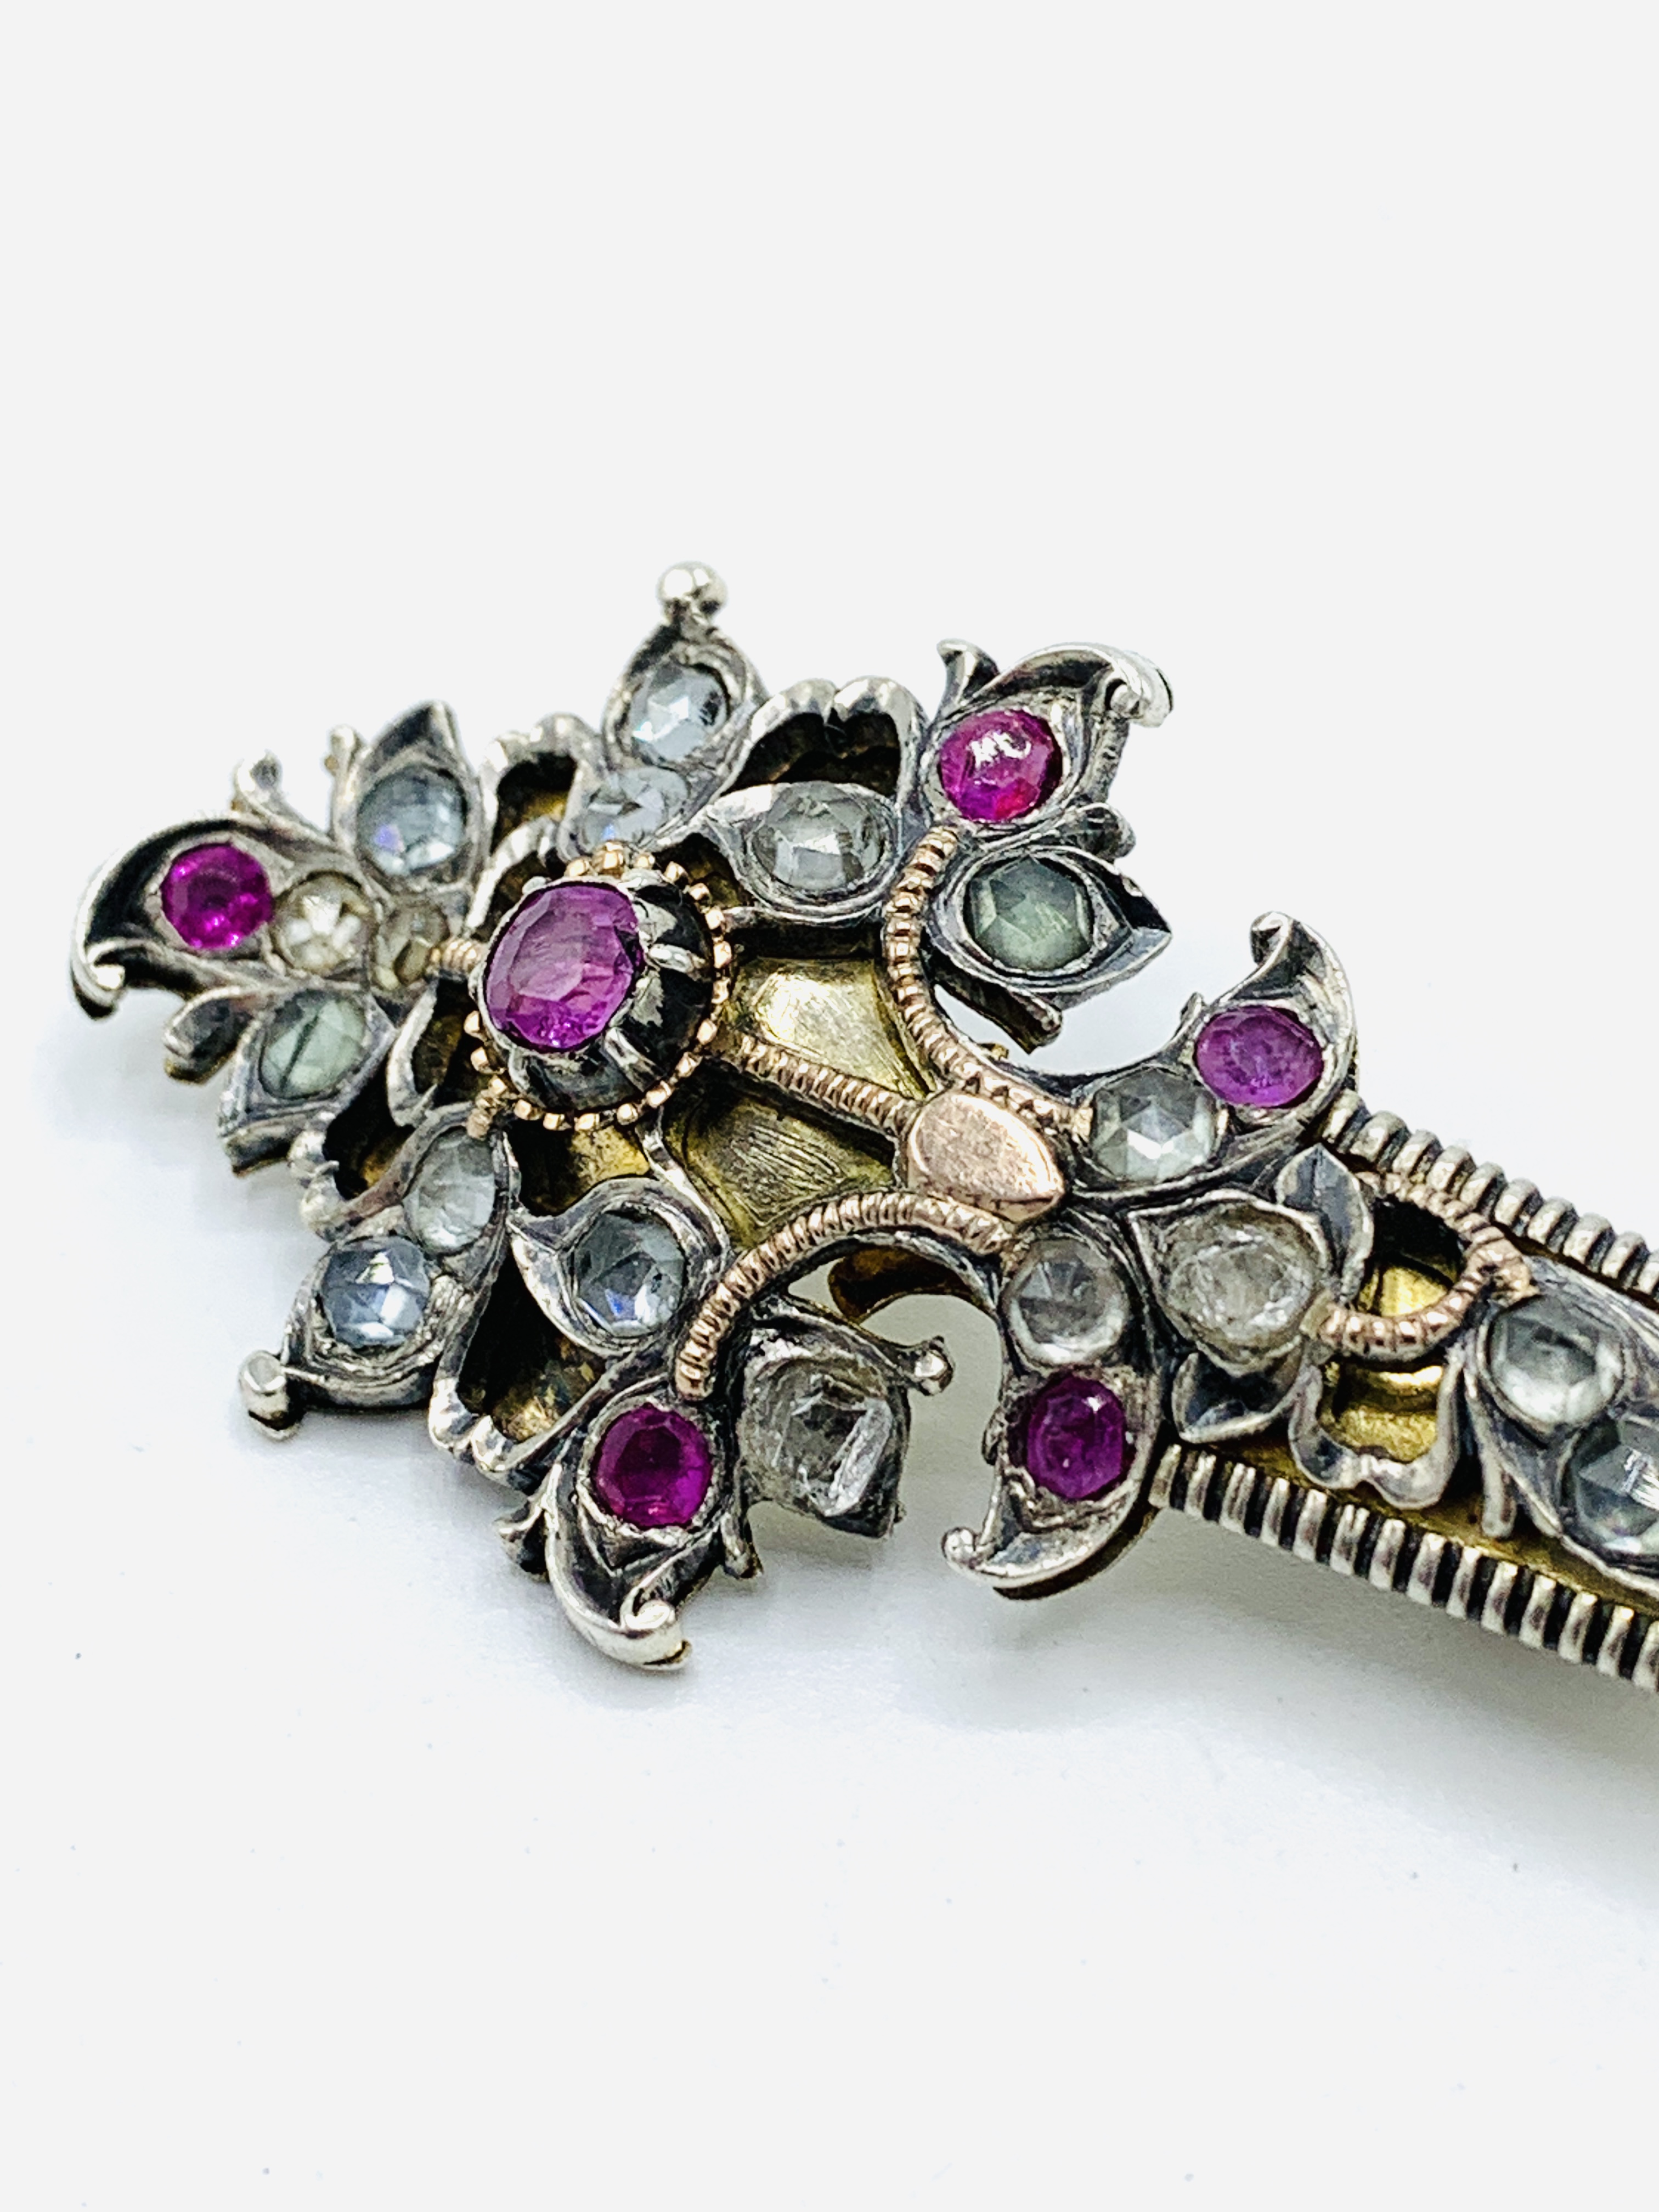 Indian made silver and ruby turban pin/brooch - Image 3 of 5